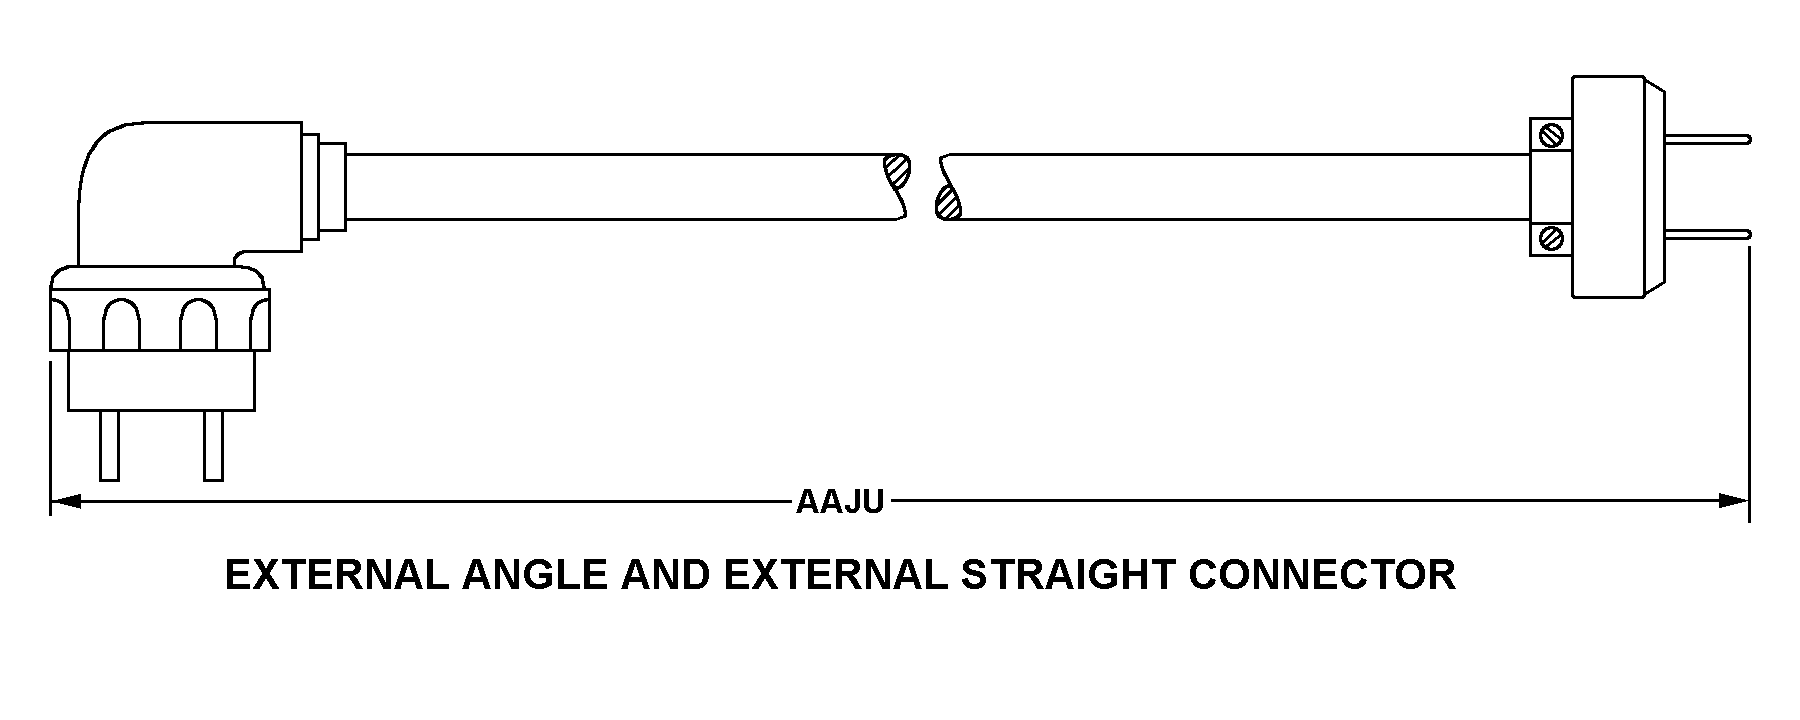 EXTERNAL ANGLE AND EXTERNAL STRAIGHT CONNECTOR style nsn 6150-01-351-6460